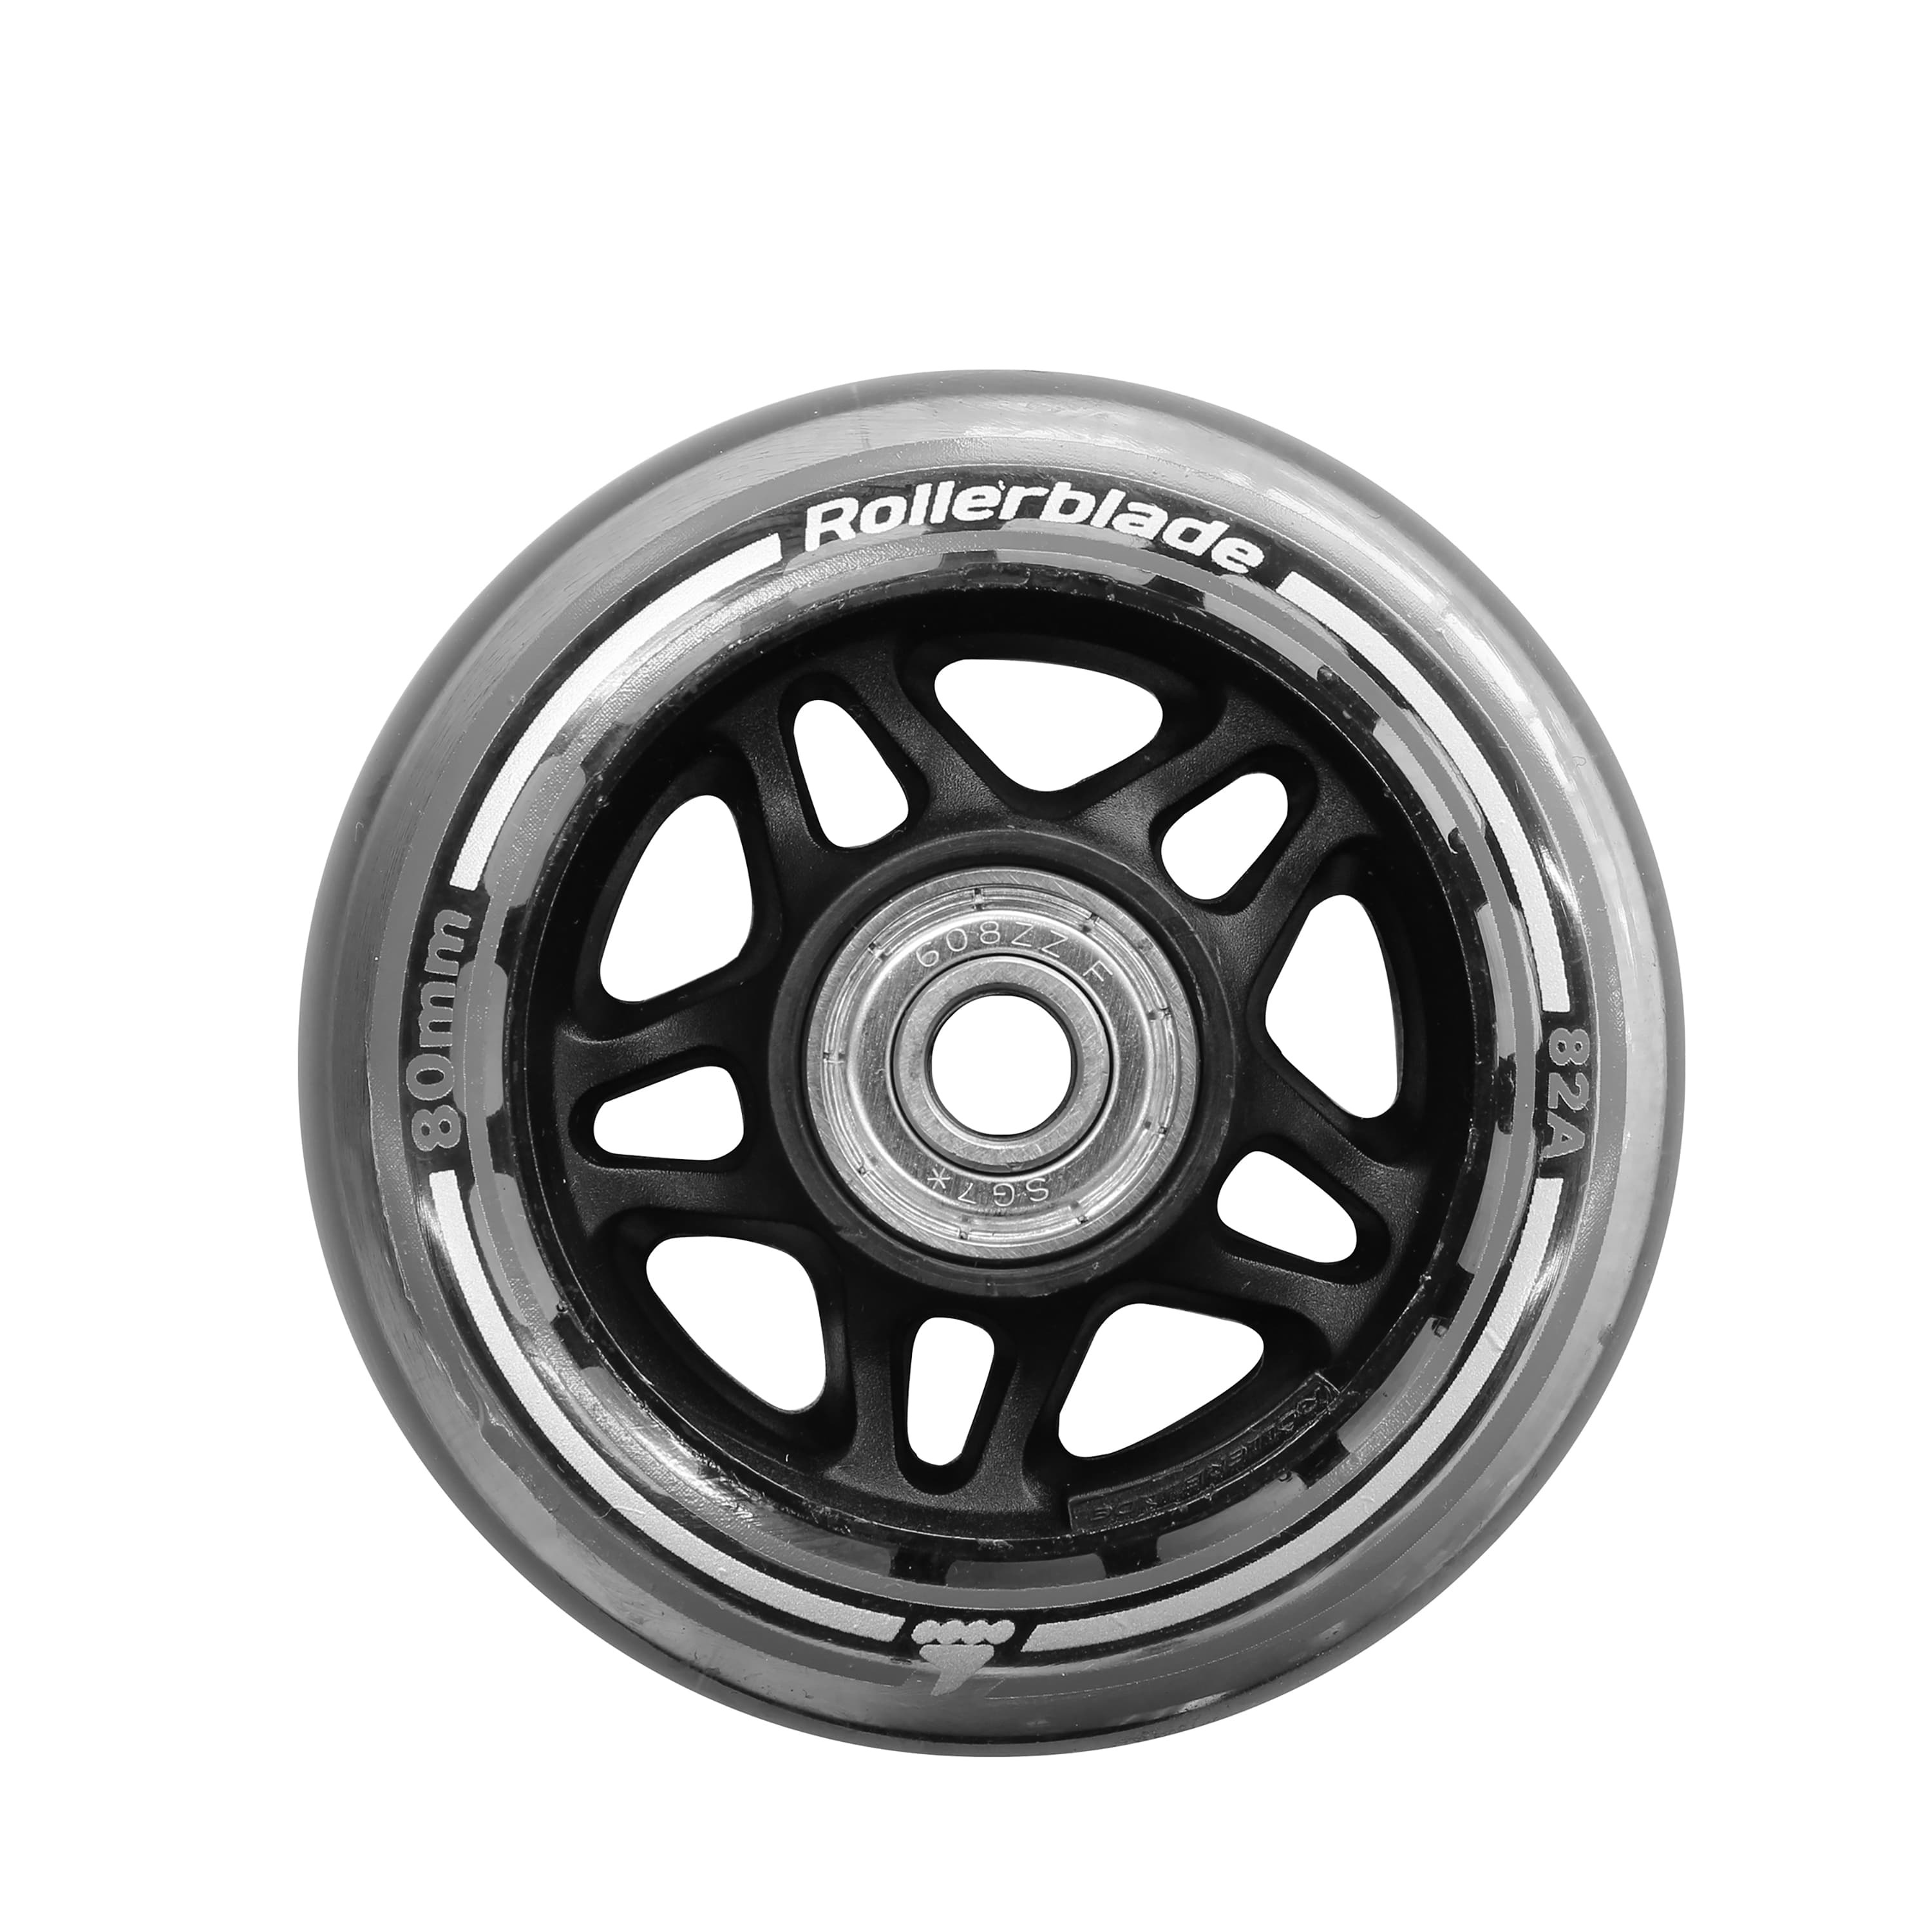 Inline Skate Explorer Elite MICRO Rollerblade Wheel 80mm 81a WITH 626 Size Bear 